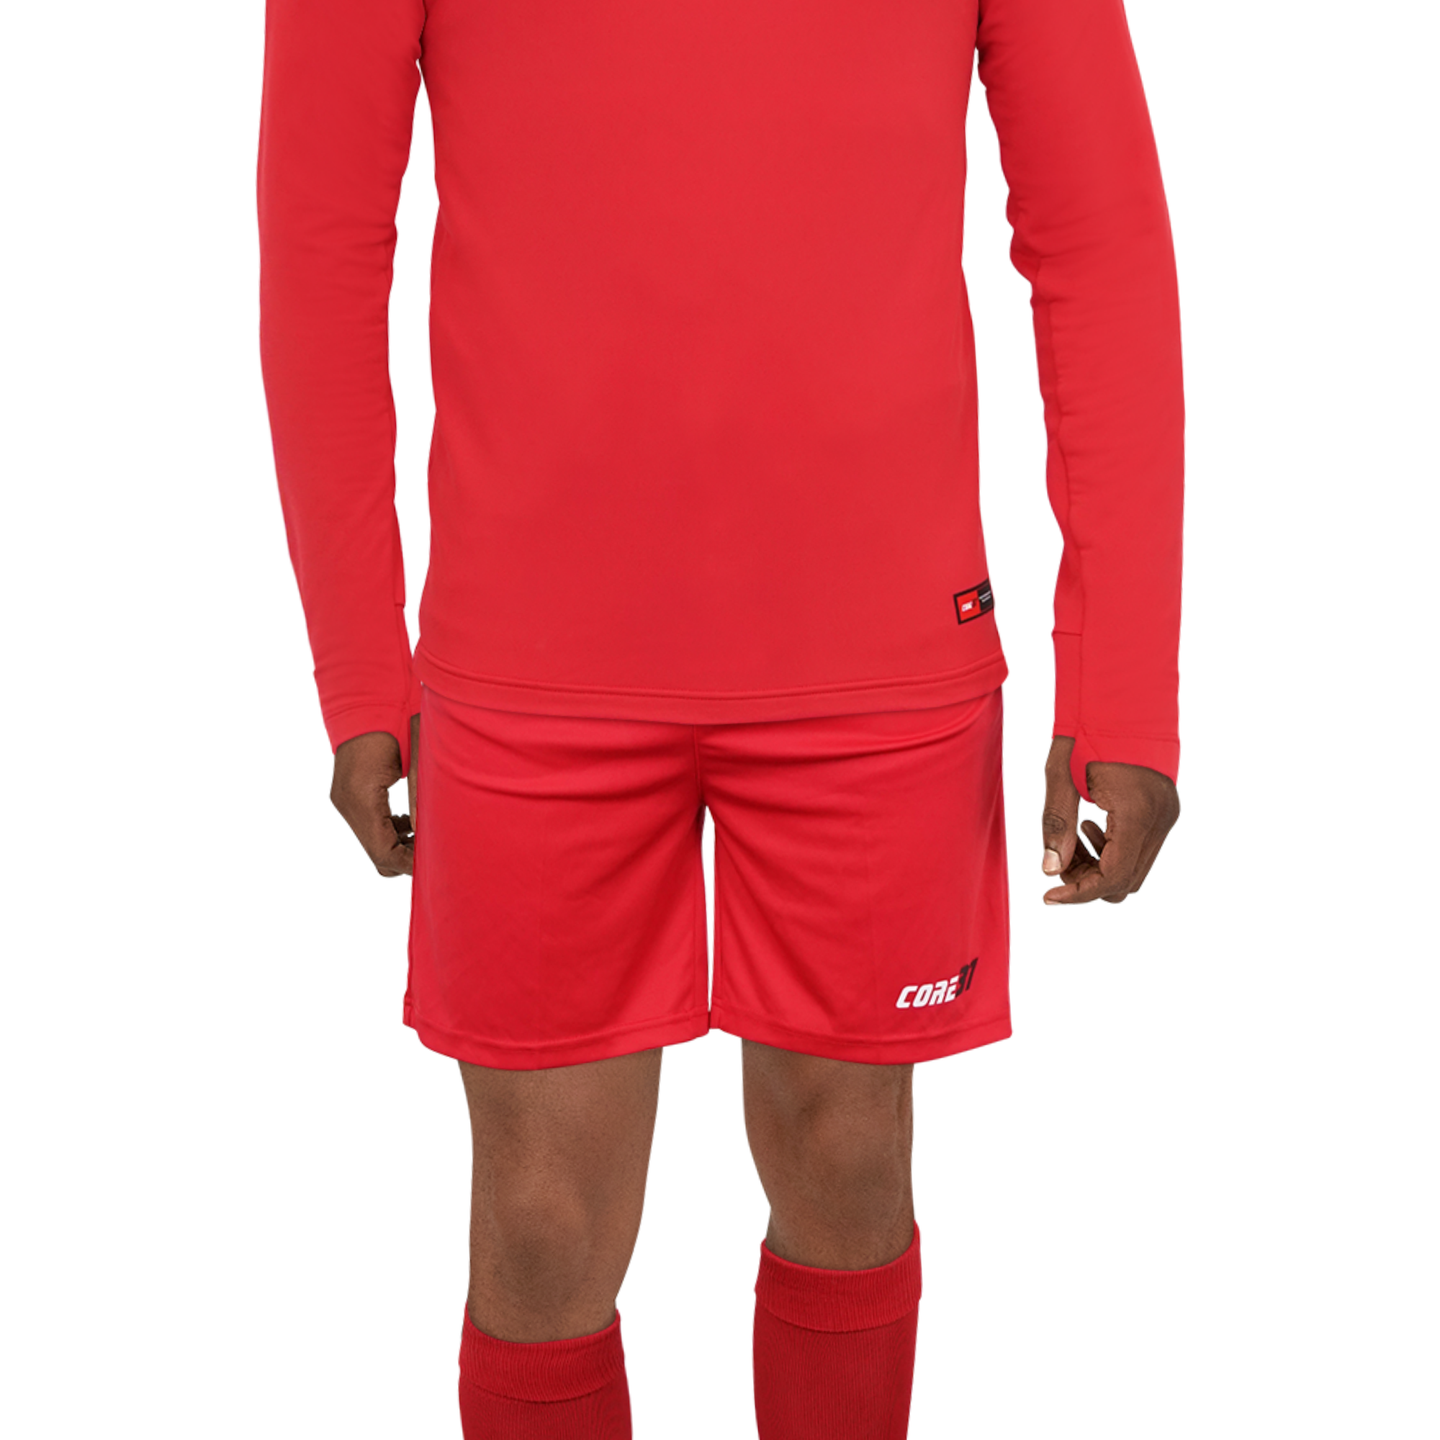 Essential Football Shorts - Red